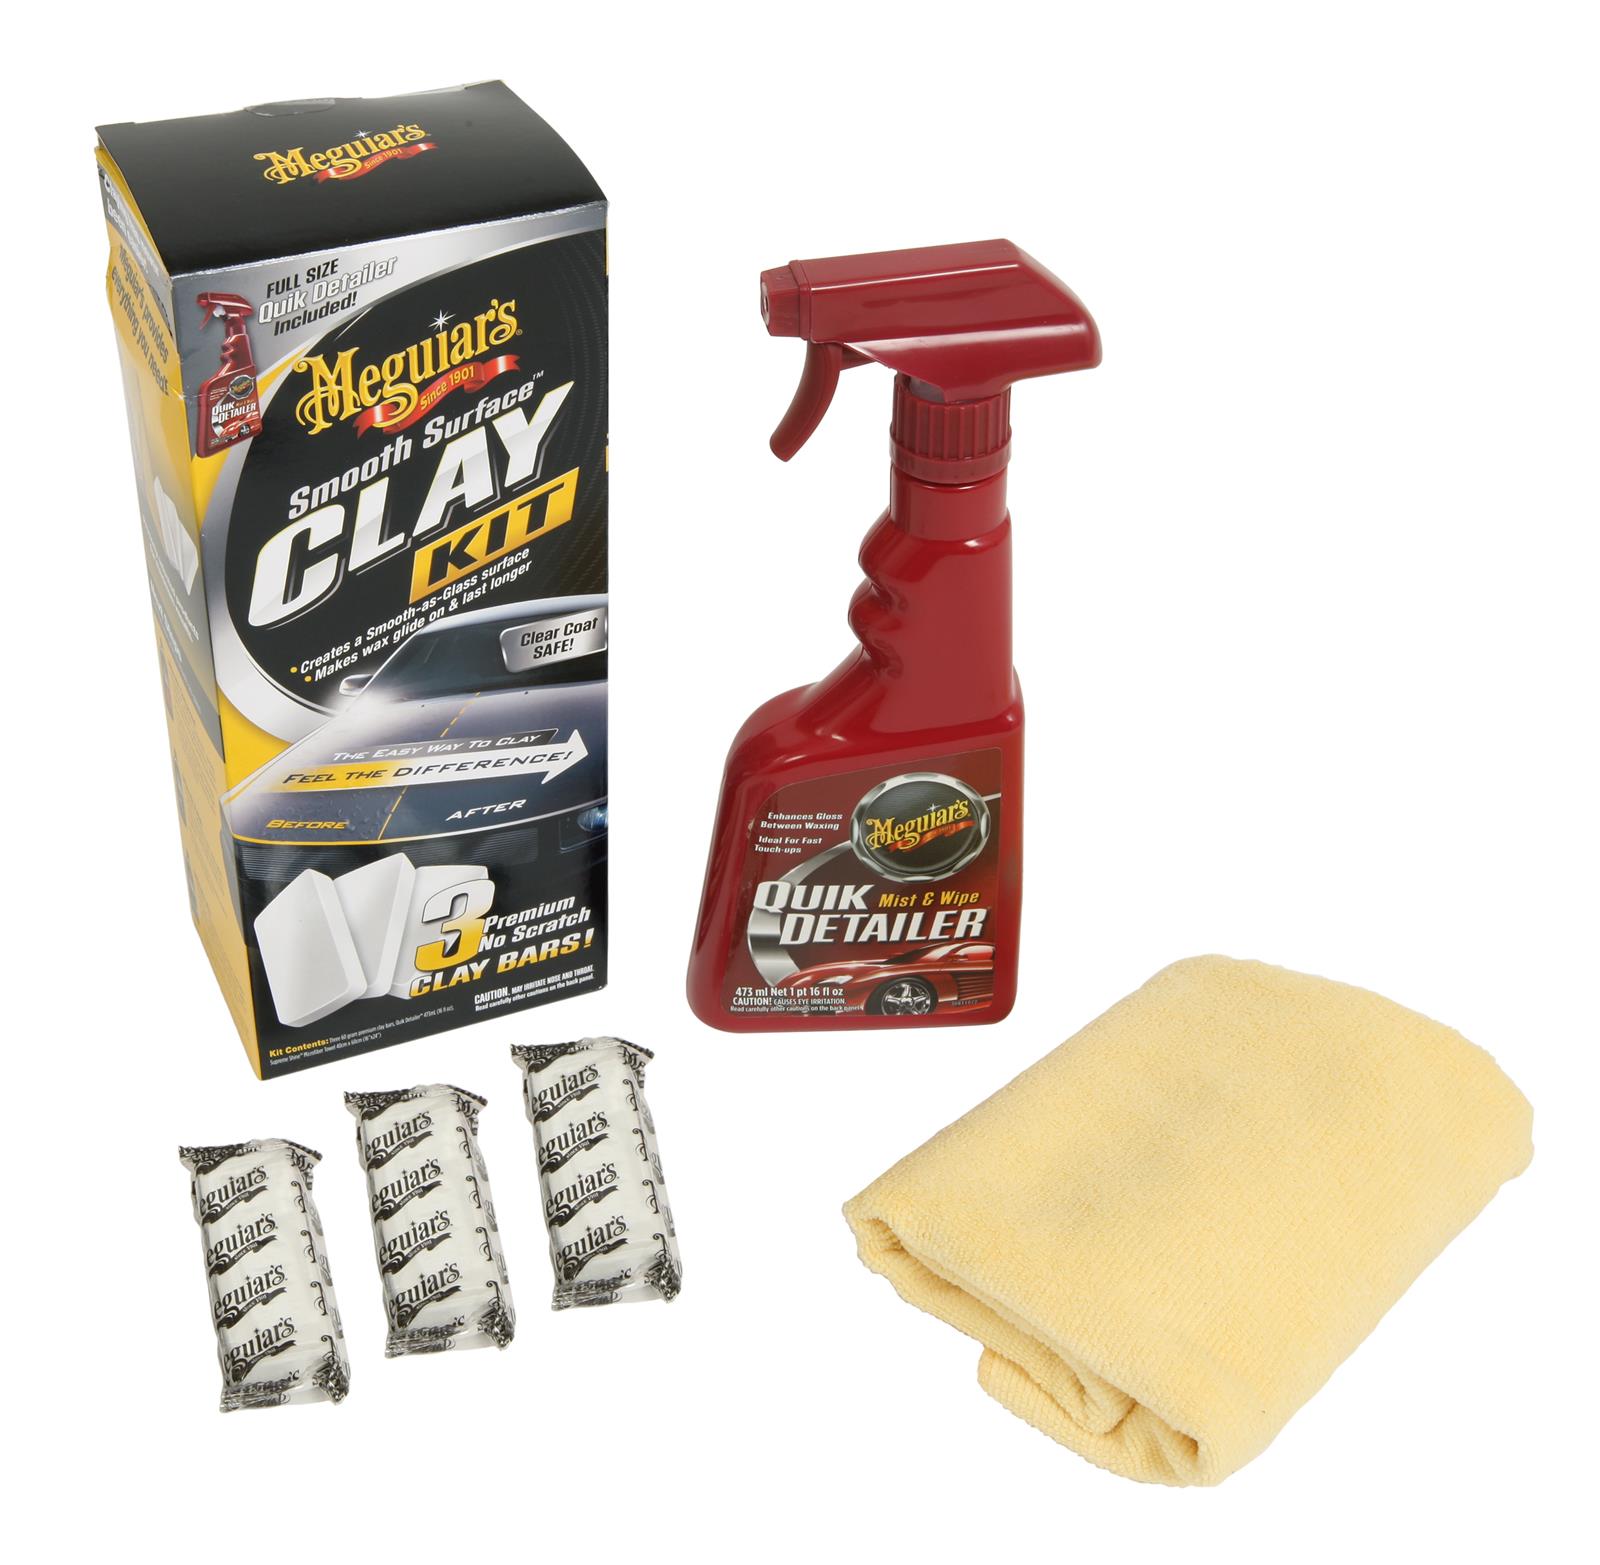 Meguiar's Smooth Surface Clay Kit - Safe and Easy Car Claying for Smooth as  Glass Finish, G191700, Kit